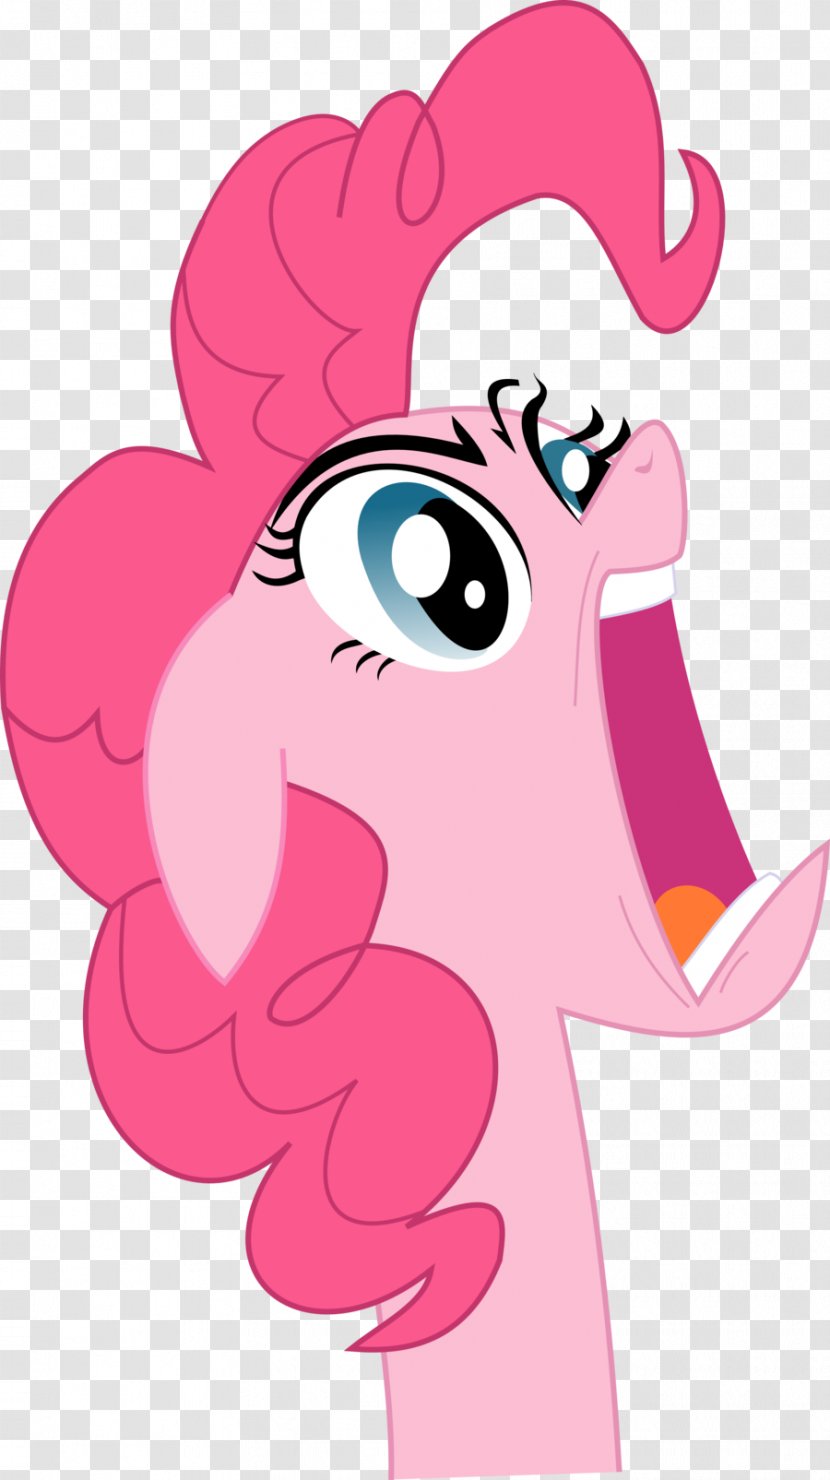 Pinkie Pie Twilight Sparkle Rarity My Little Pony - Heart - Bloom Vector Transparent PNG